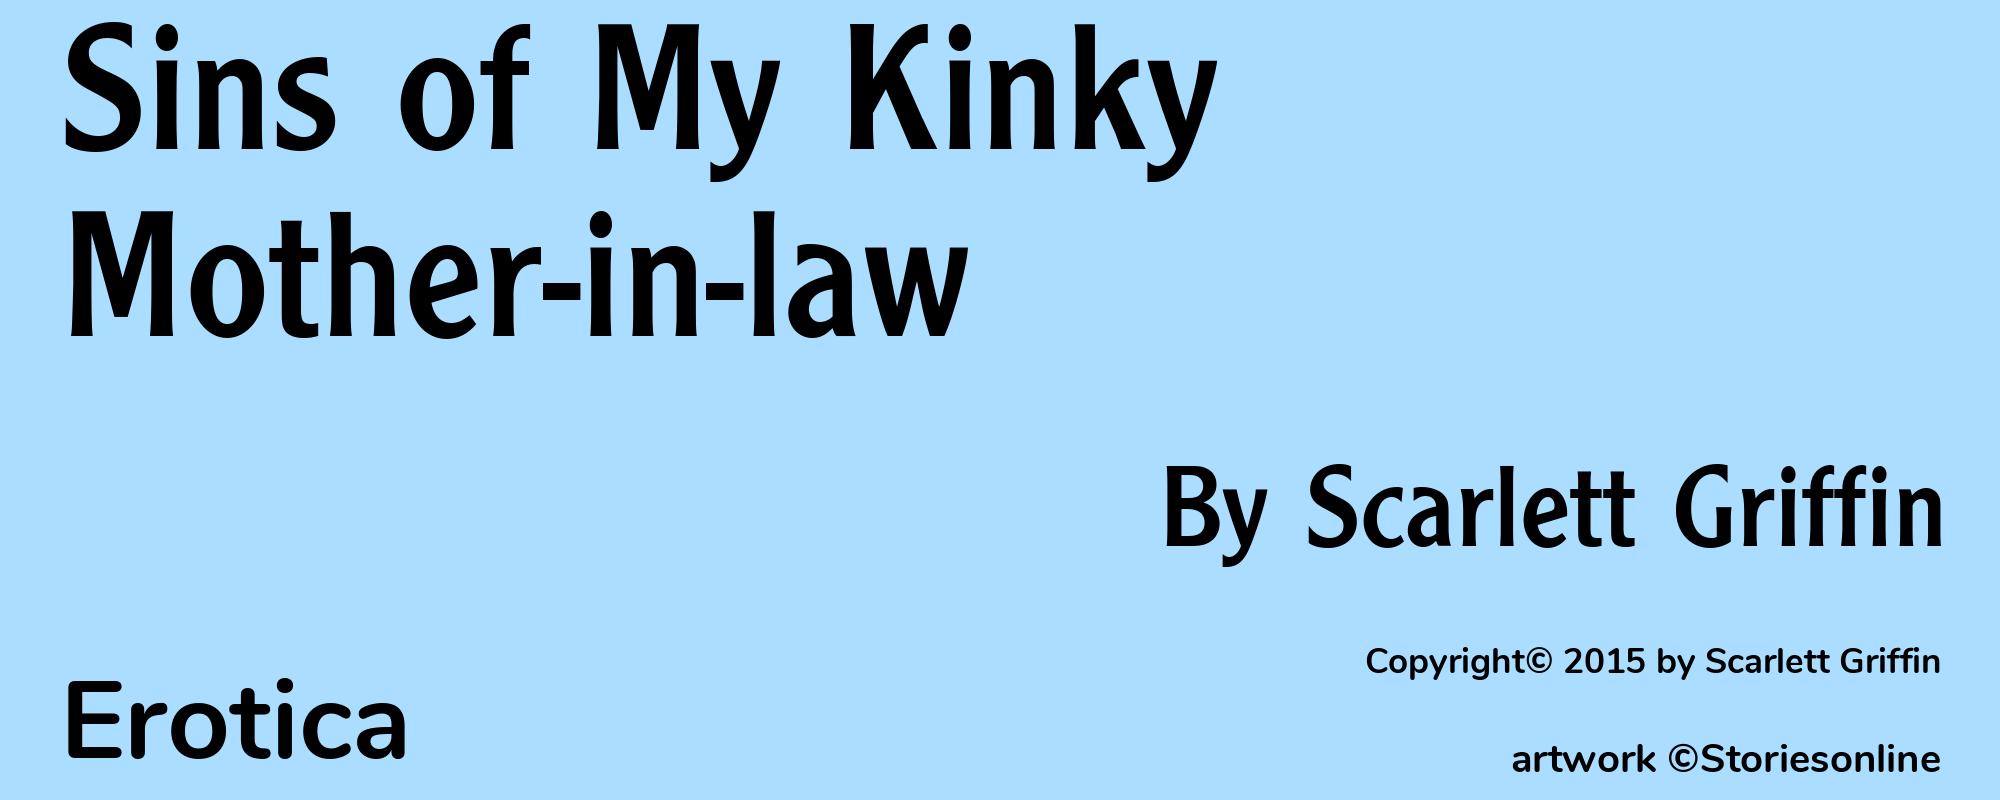 Sins of My Kinky Mother-in-law - Cover